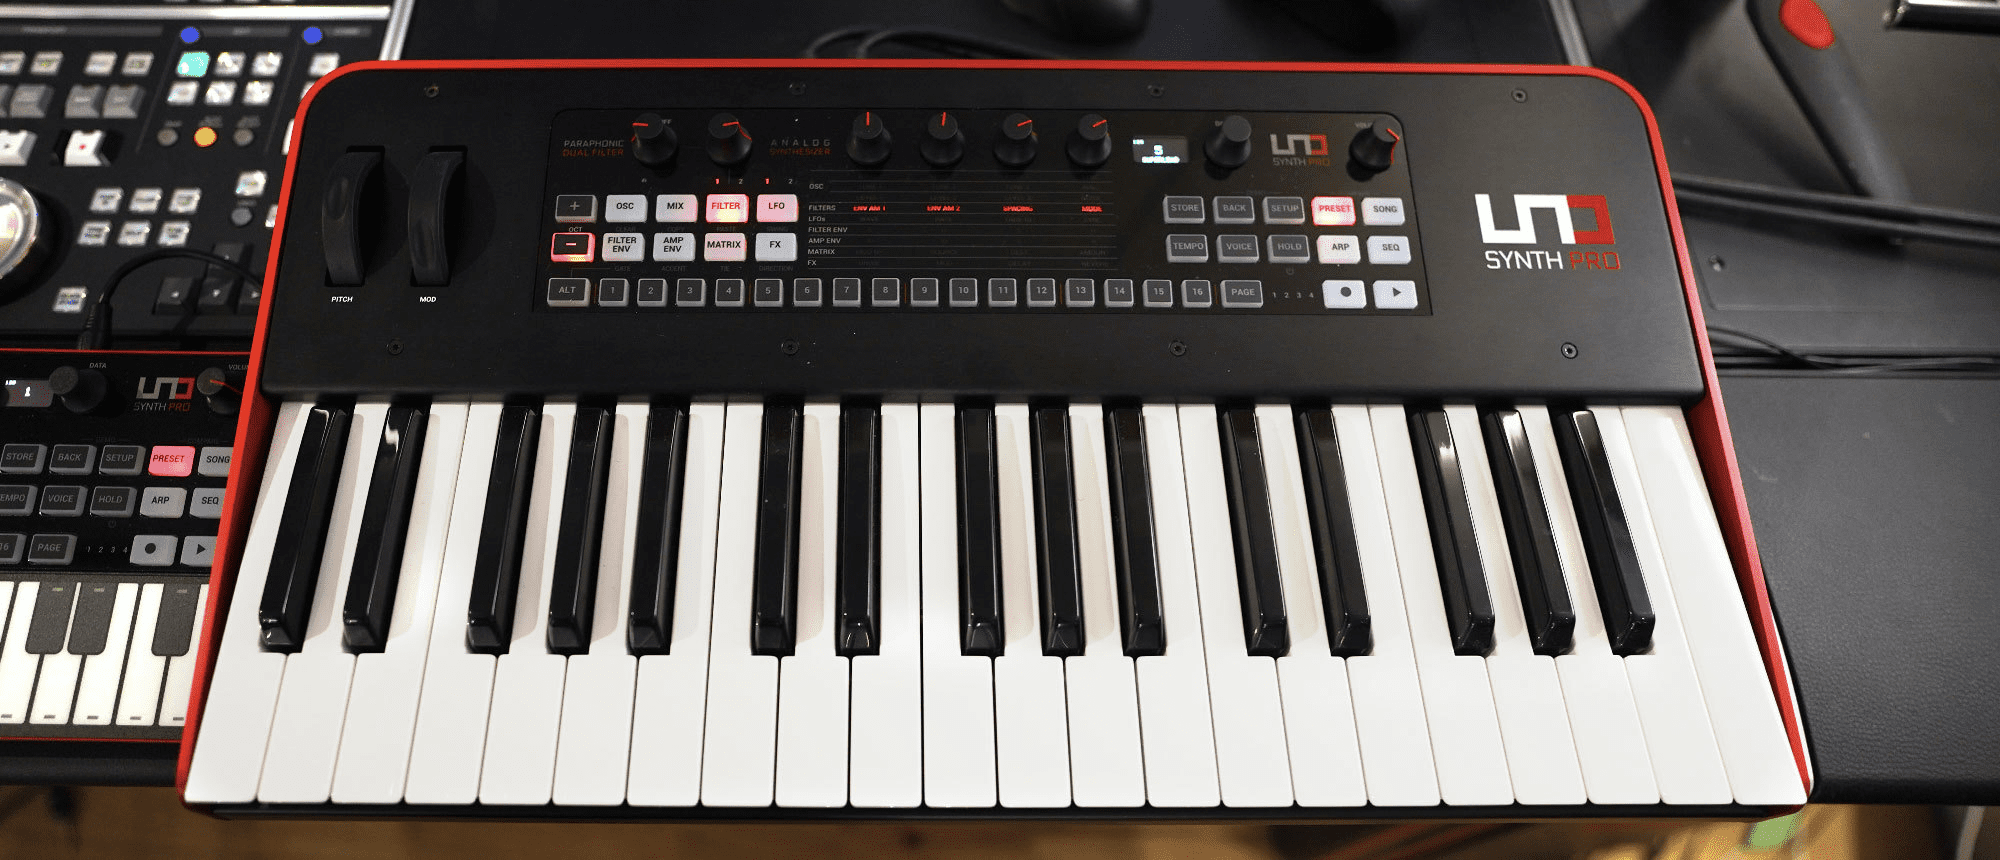 New hands-on UNO Synth Pro